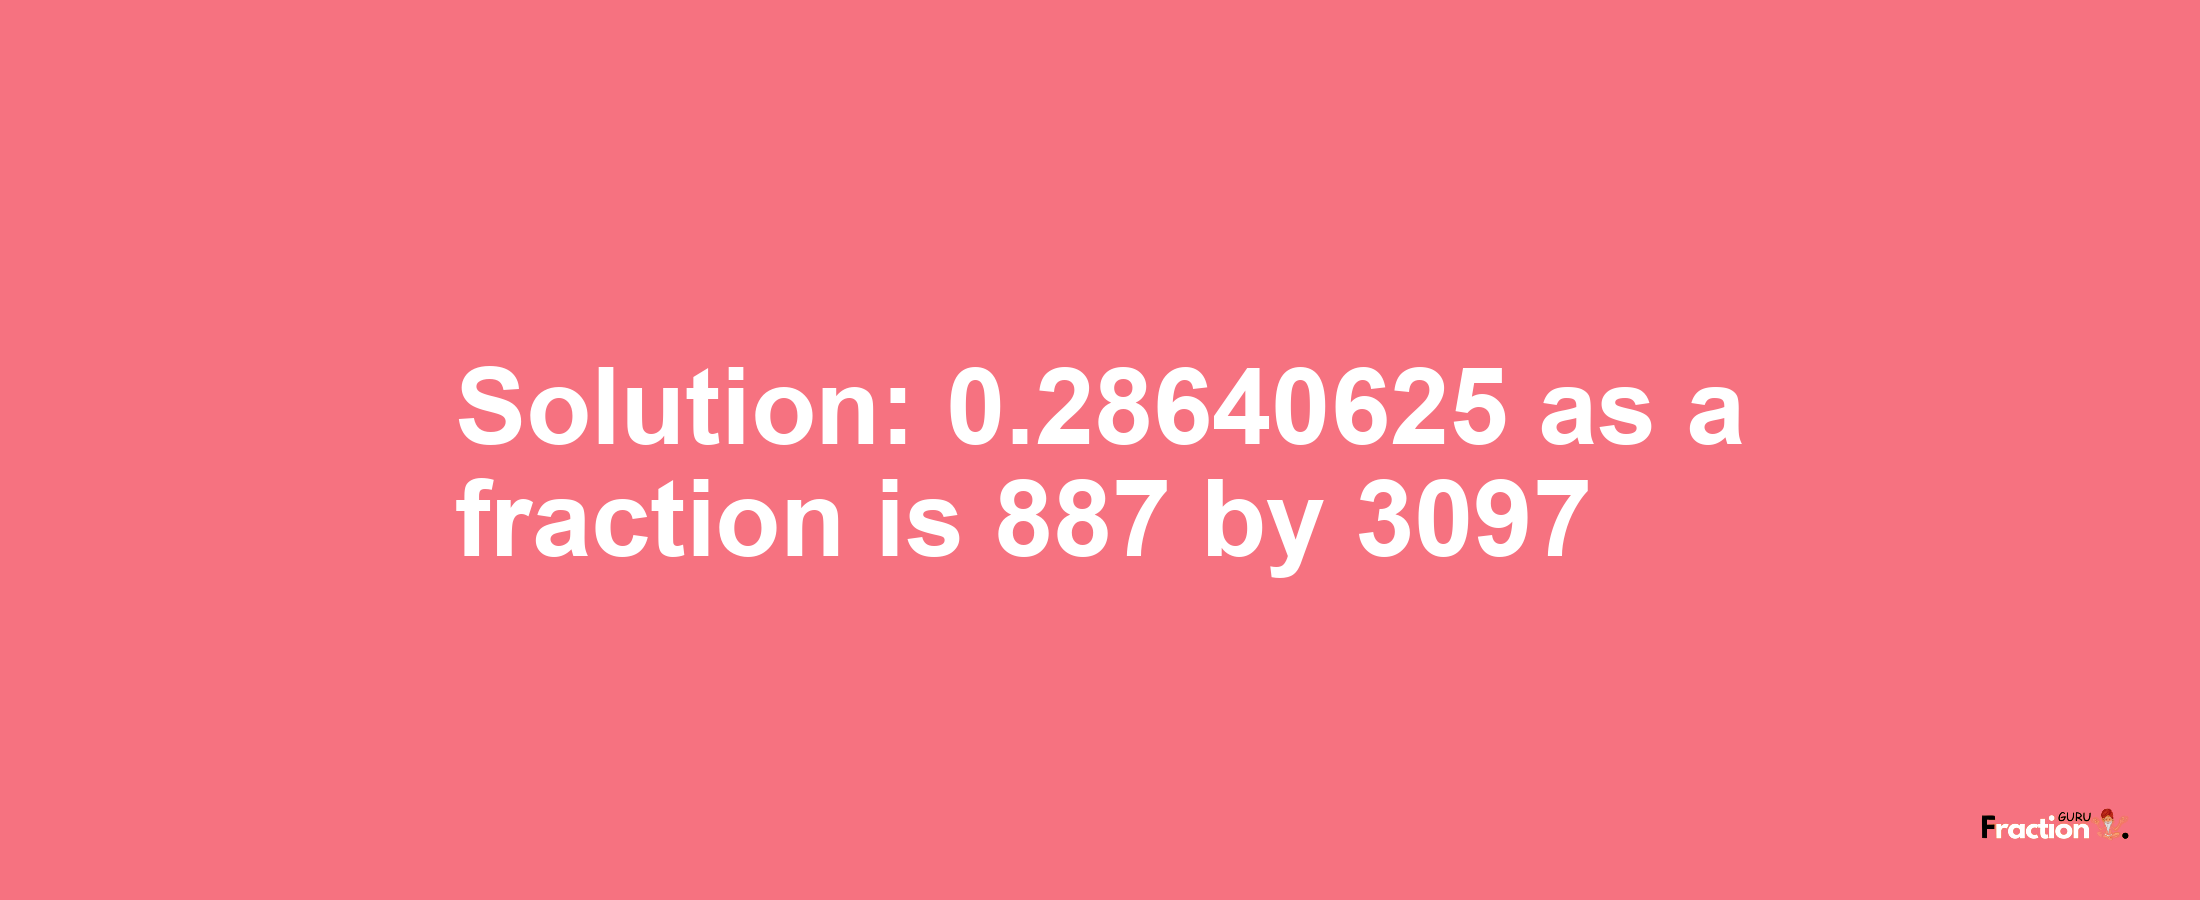 Solution:0.28640625 as a fraction is 887/3097